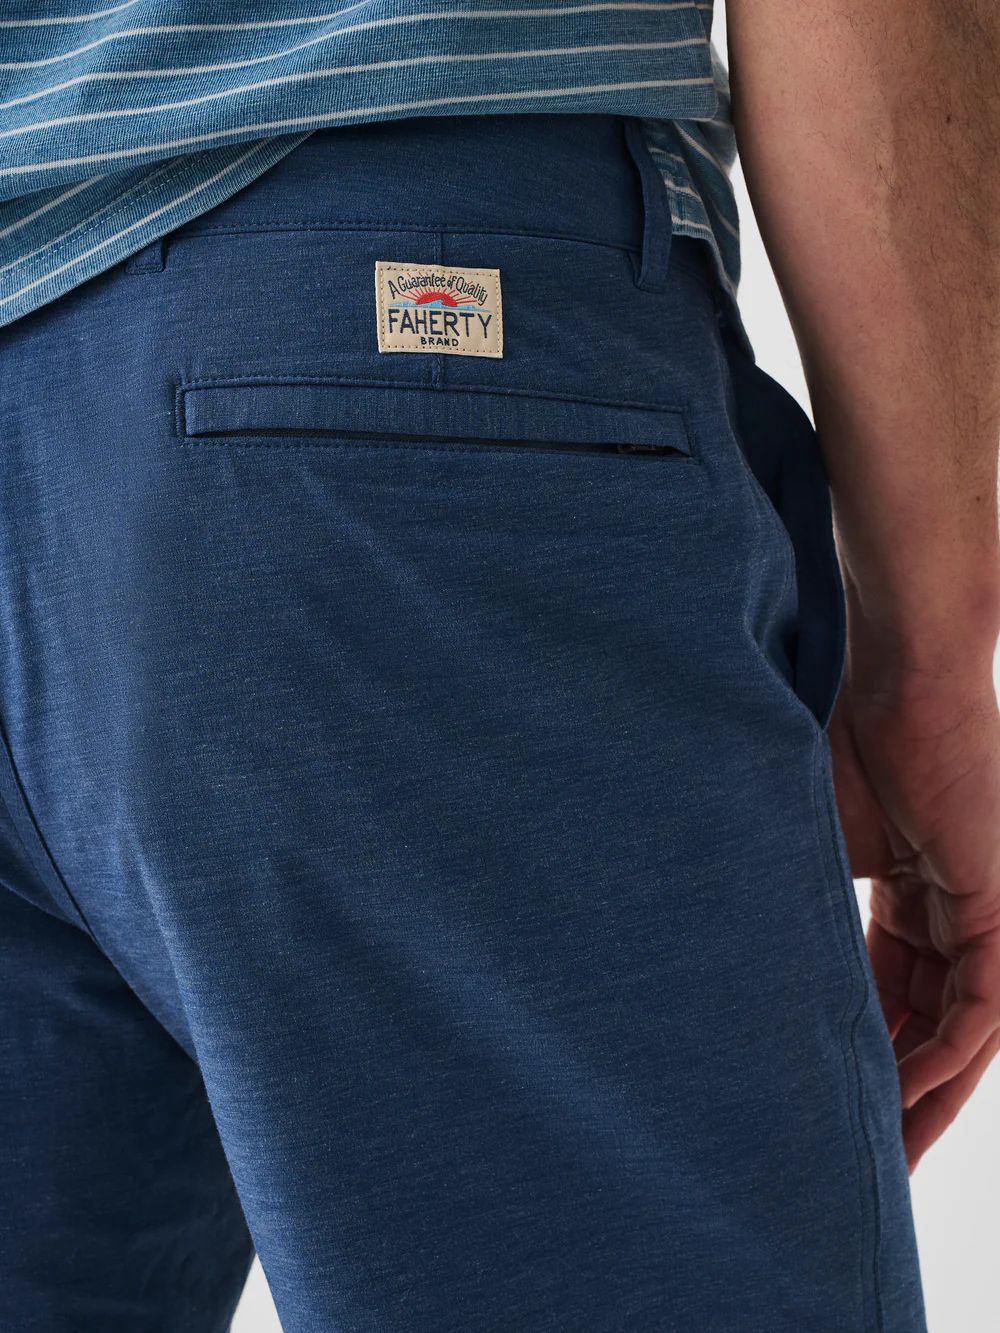 All Day™ Shorts | Faherty